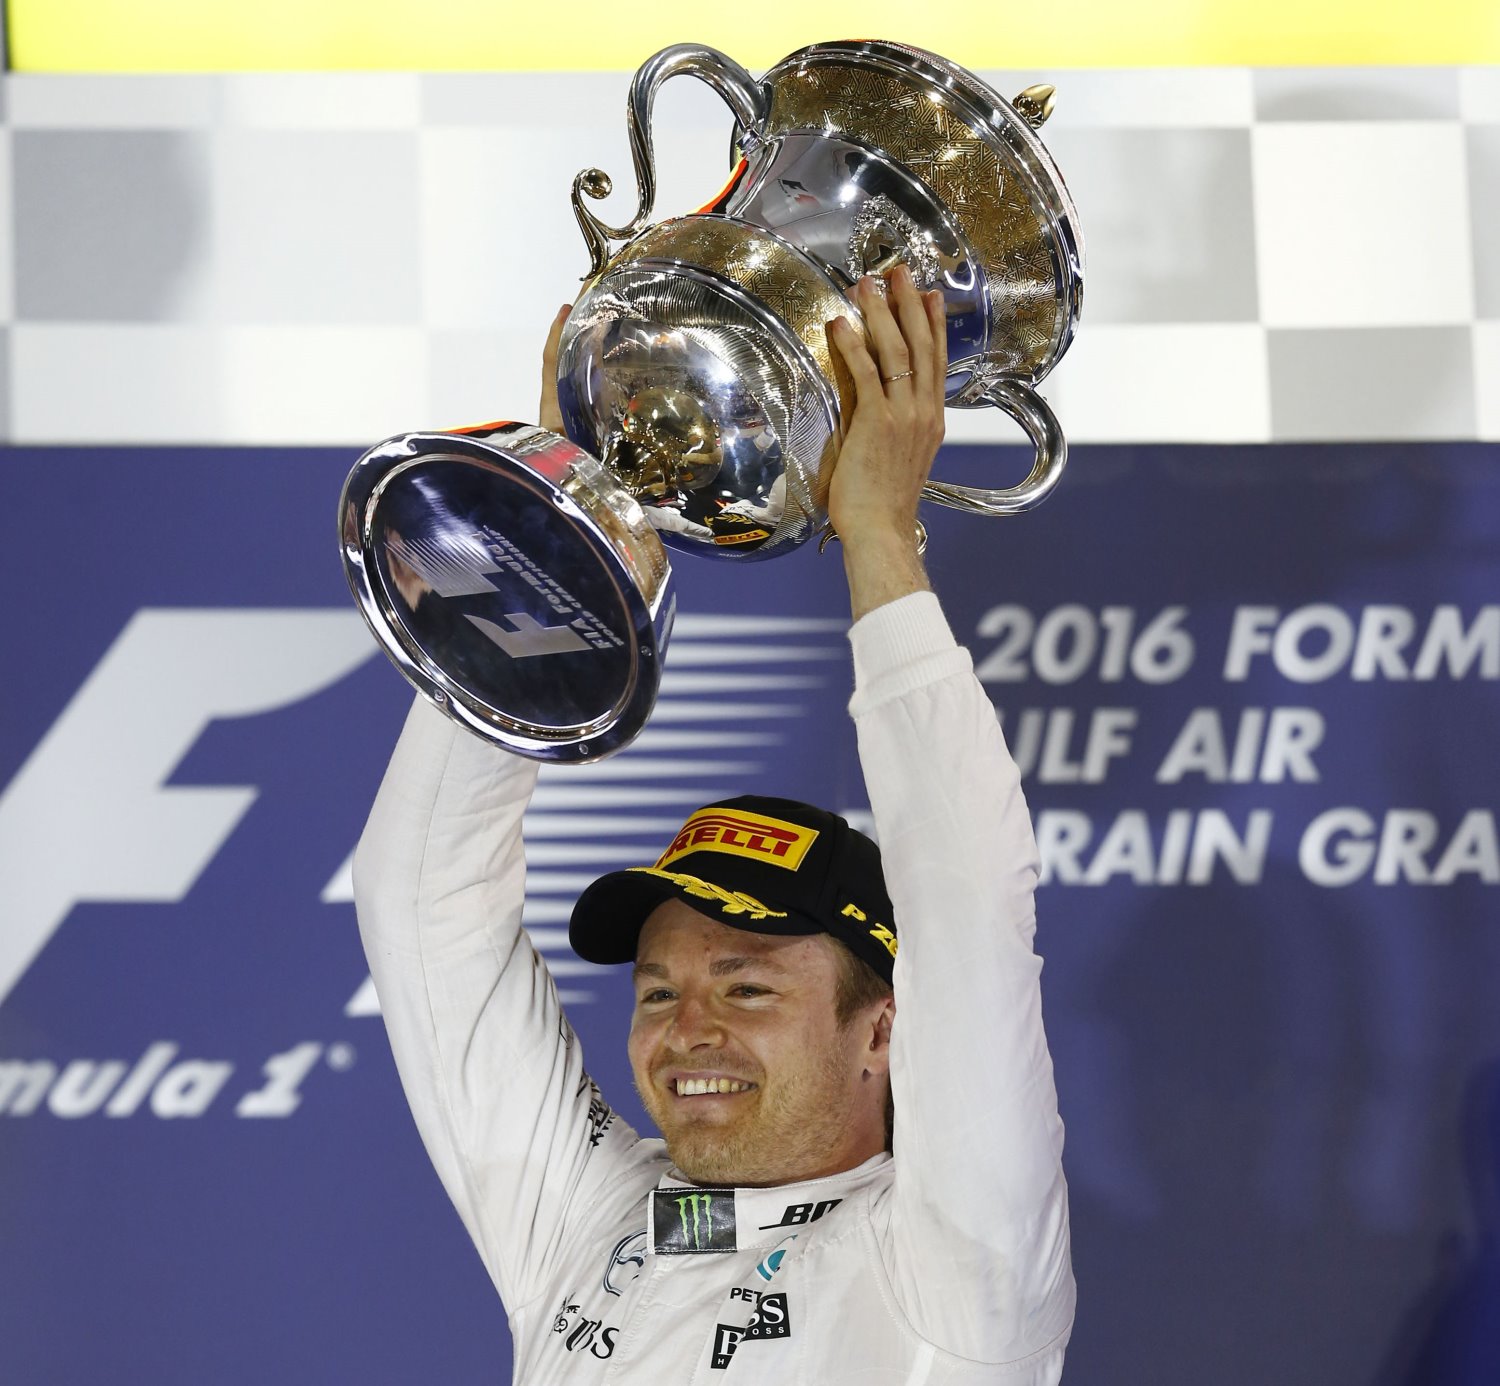 The hottest driver in Formula One extends his win streak to five races 